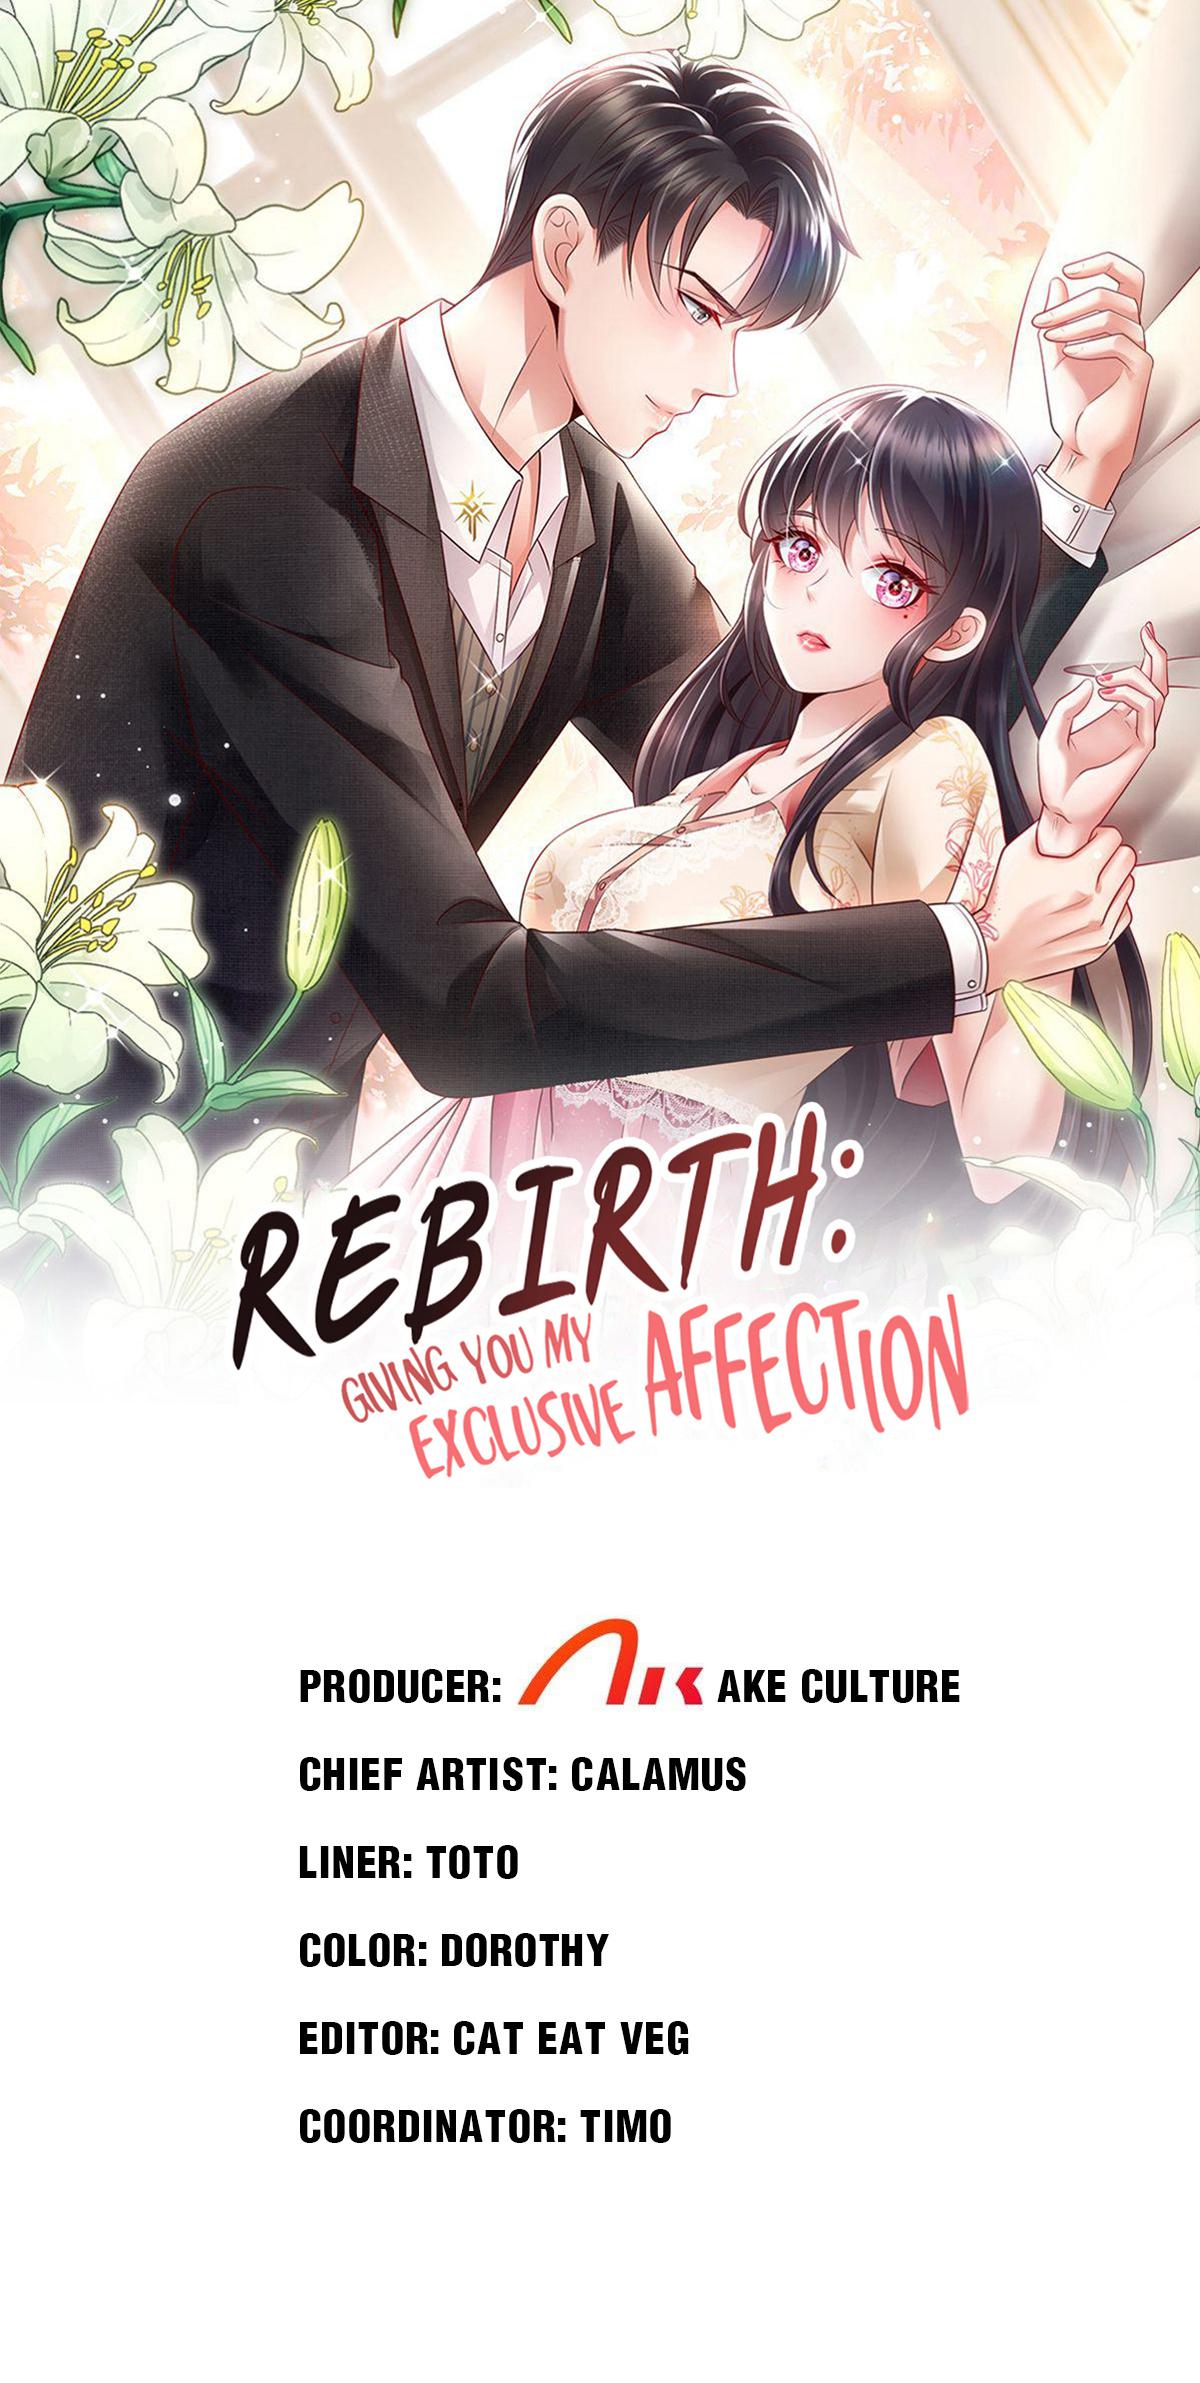 Rebirth: Giving You My Exclusive Affection 200